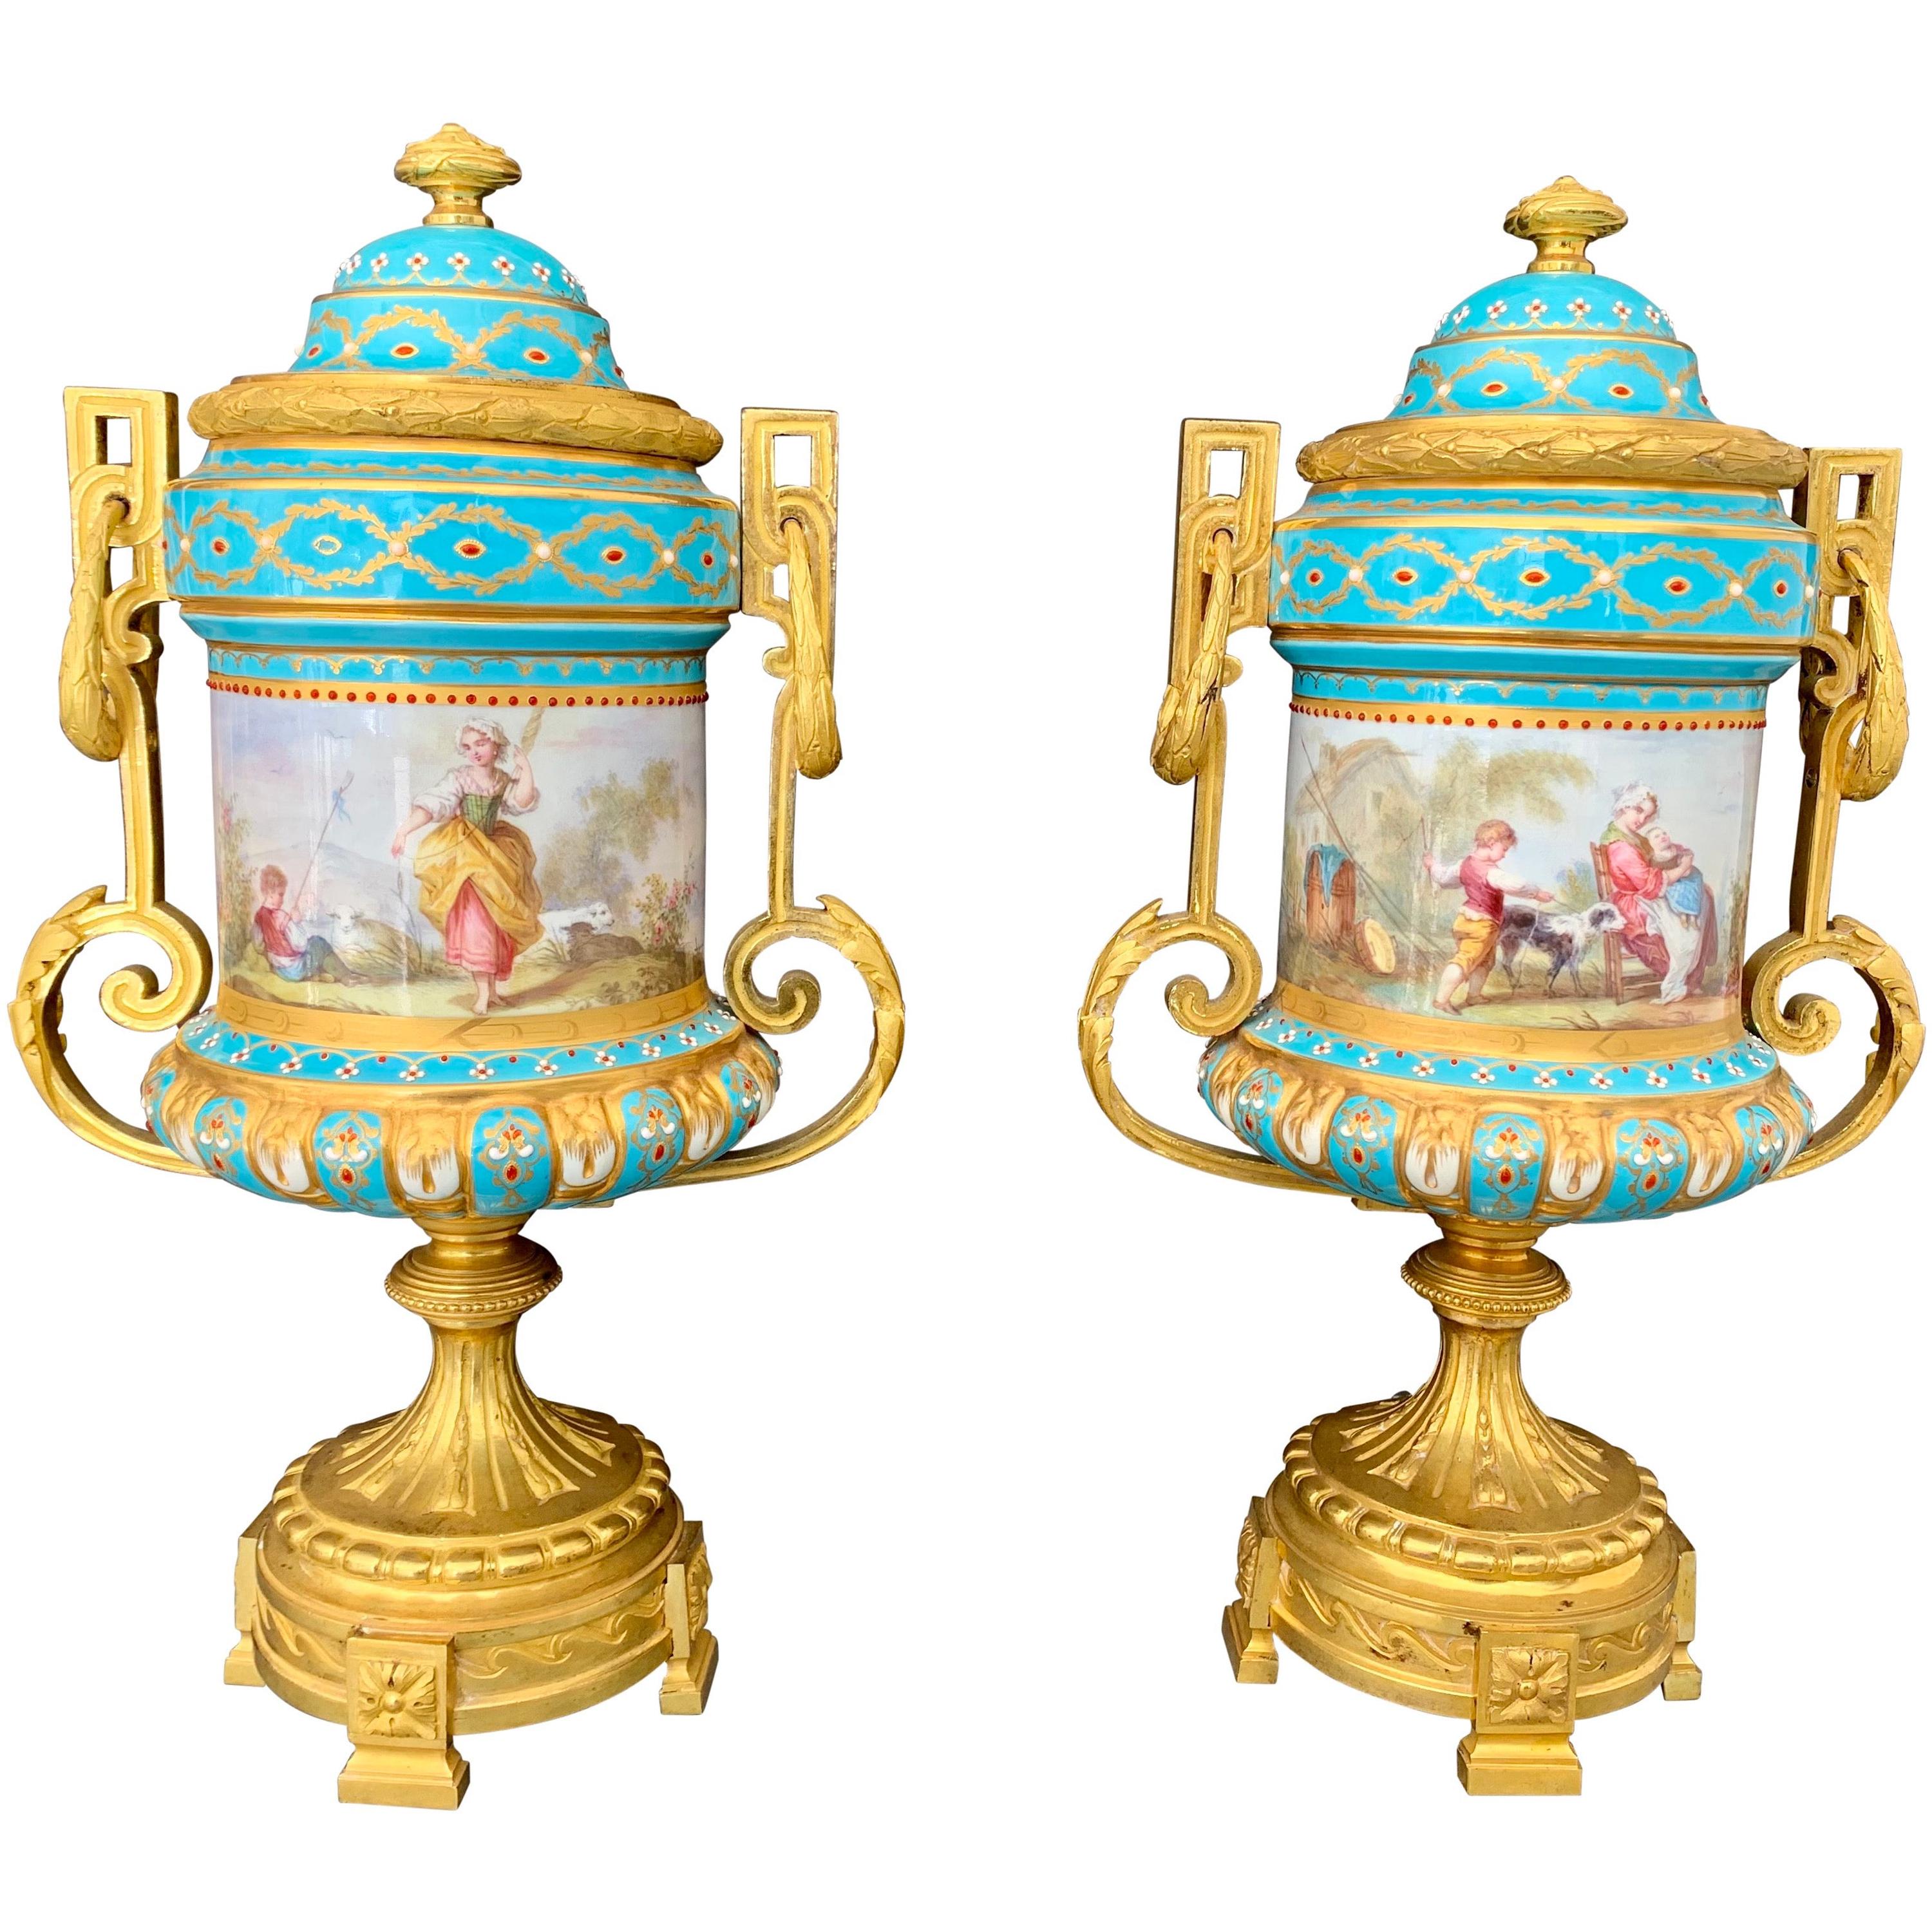 Pair of 19th Century French Sevres Style Jeweled Porcelain Urns/Vases